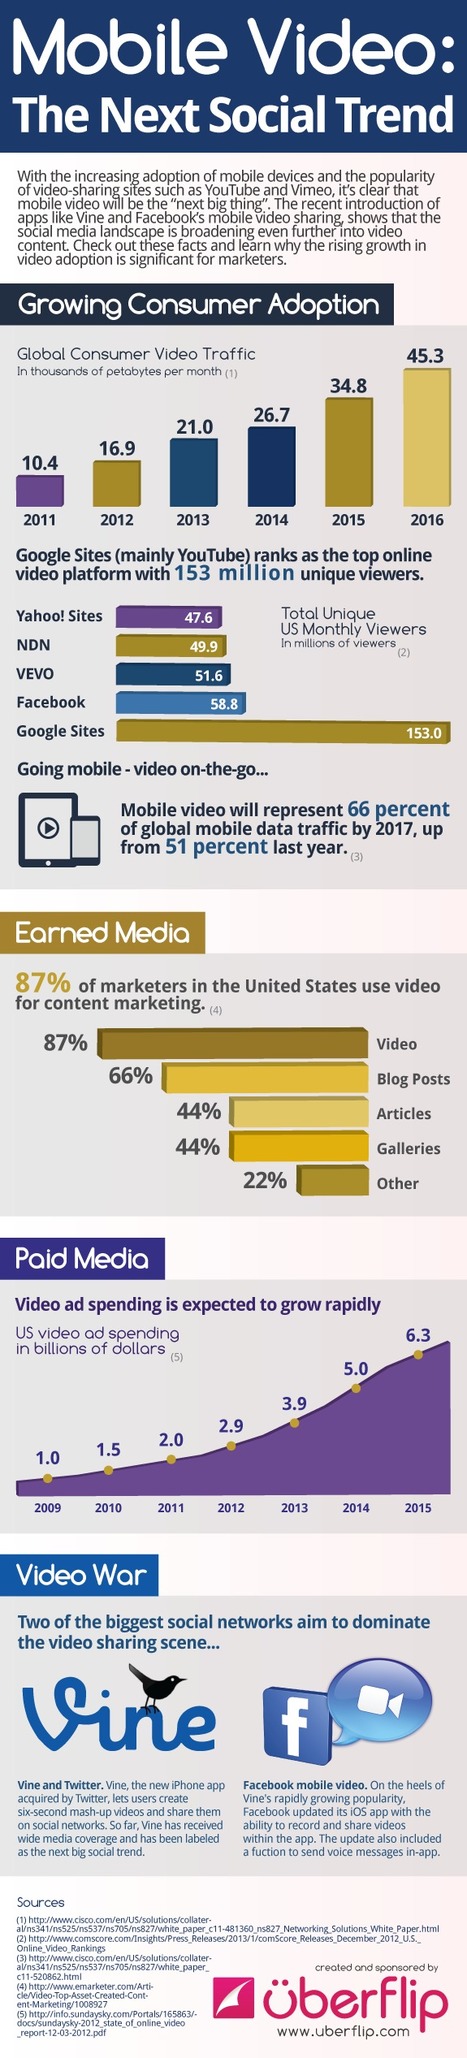 Is Mobile Video The Next Big Thing In Social Media? [INFOGRAPHIC] | E-Learning-Inclusivo (Mashup) | Scoop.it